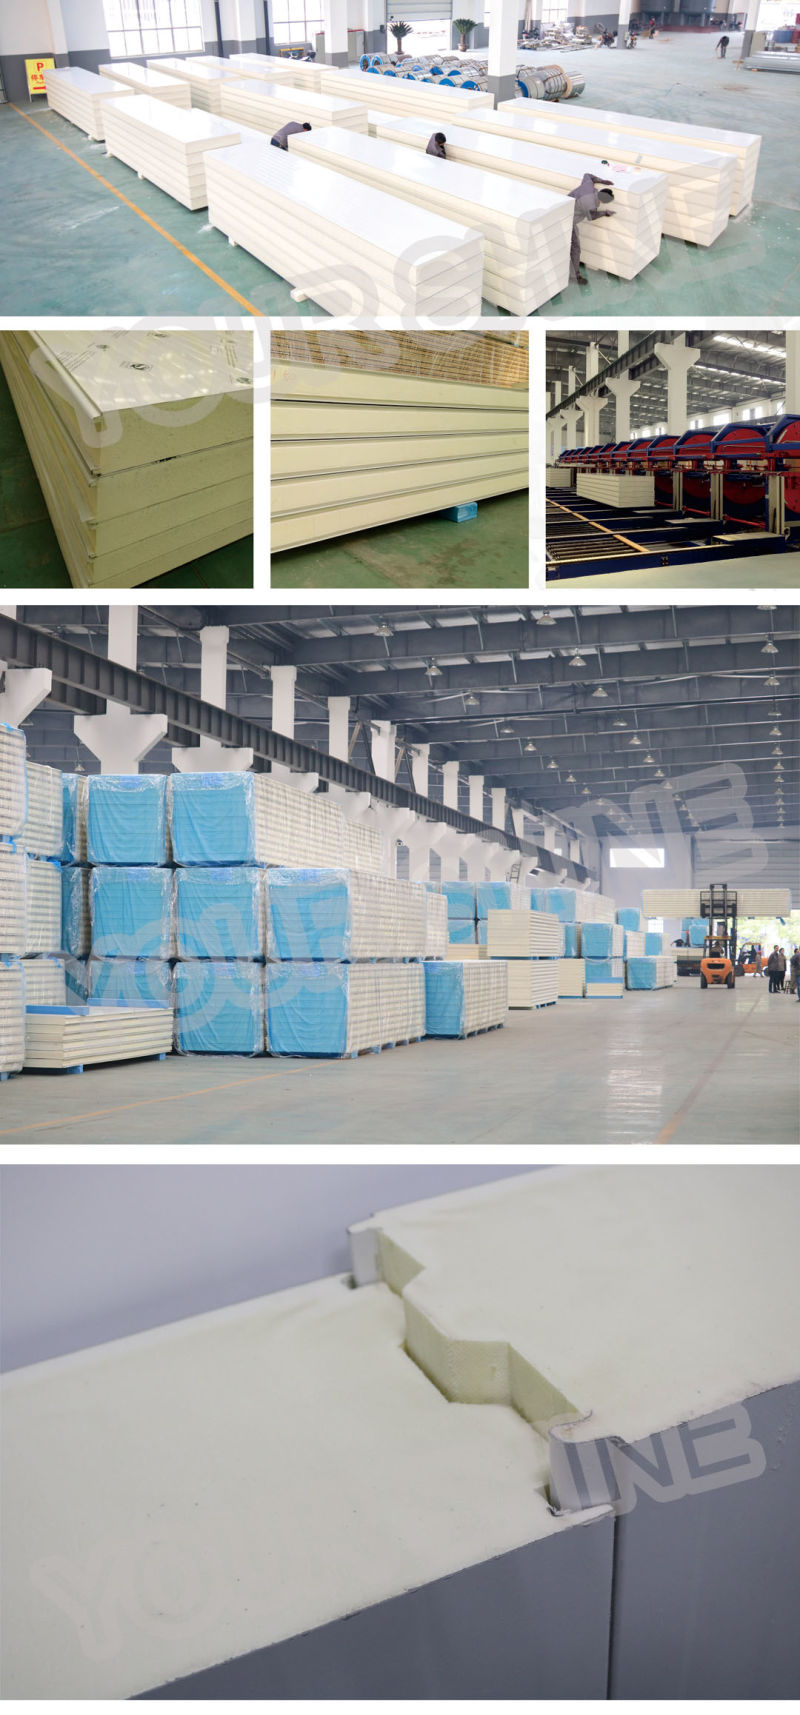 PU Sandwich Panels / Polyurethane (PUF) Panels / Puf Panels for Roofing/Cladding, Walls/Ceiling/Partitions +86 18217460170 Dubai